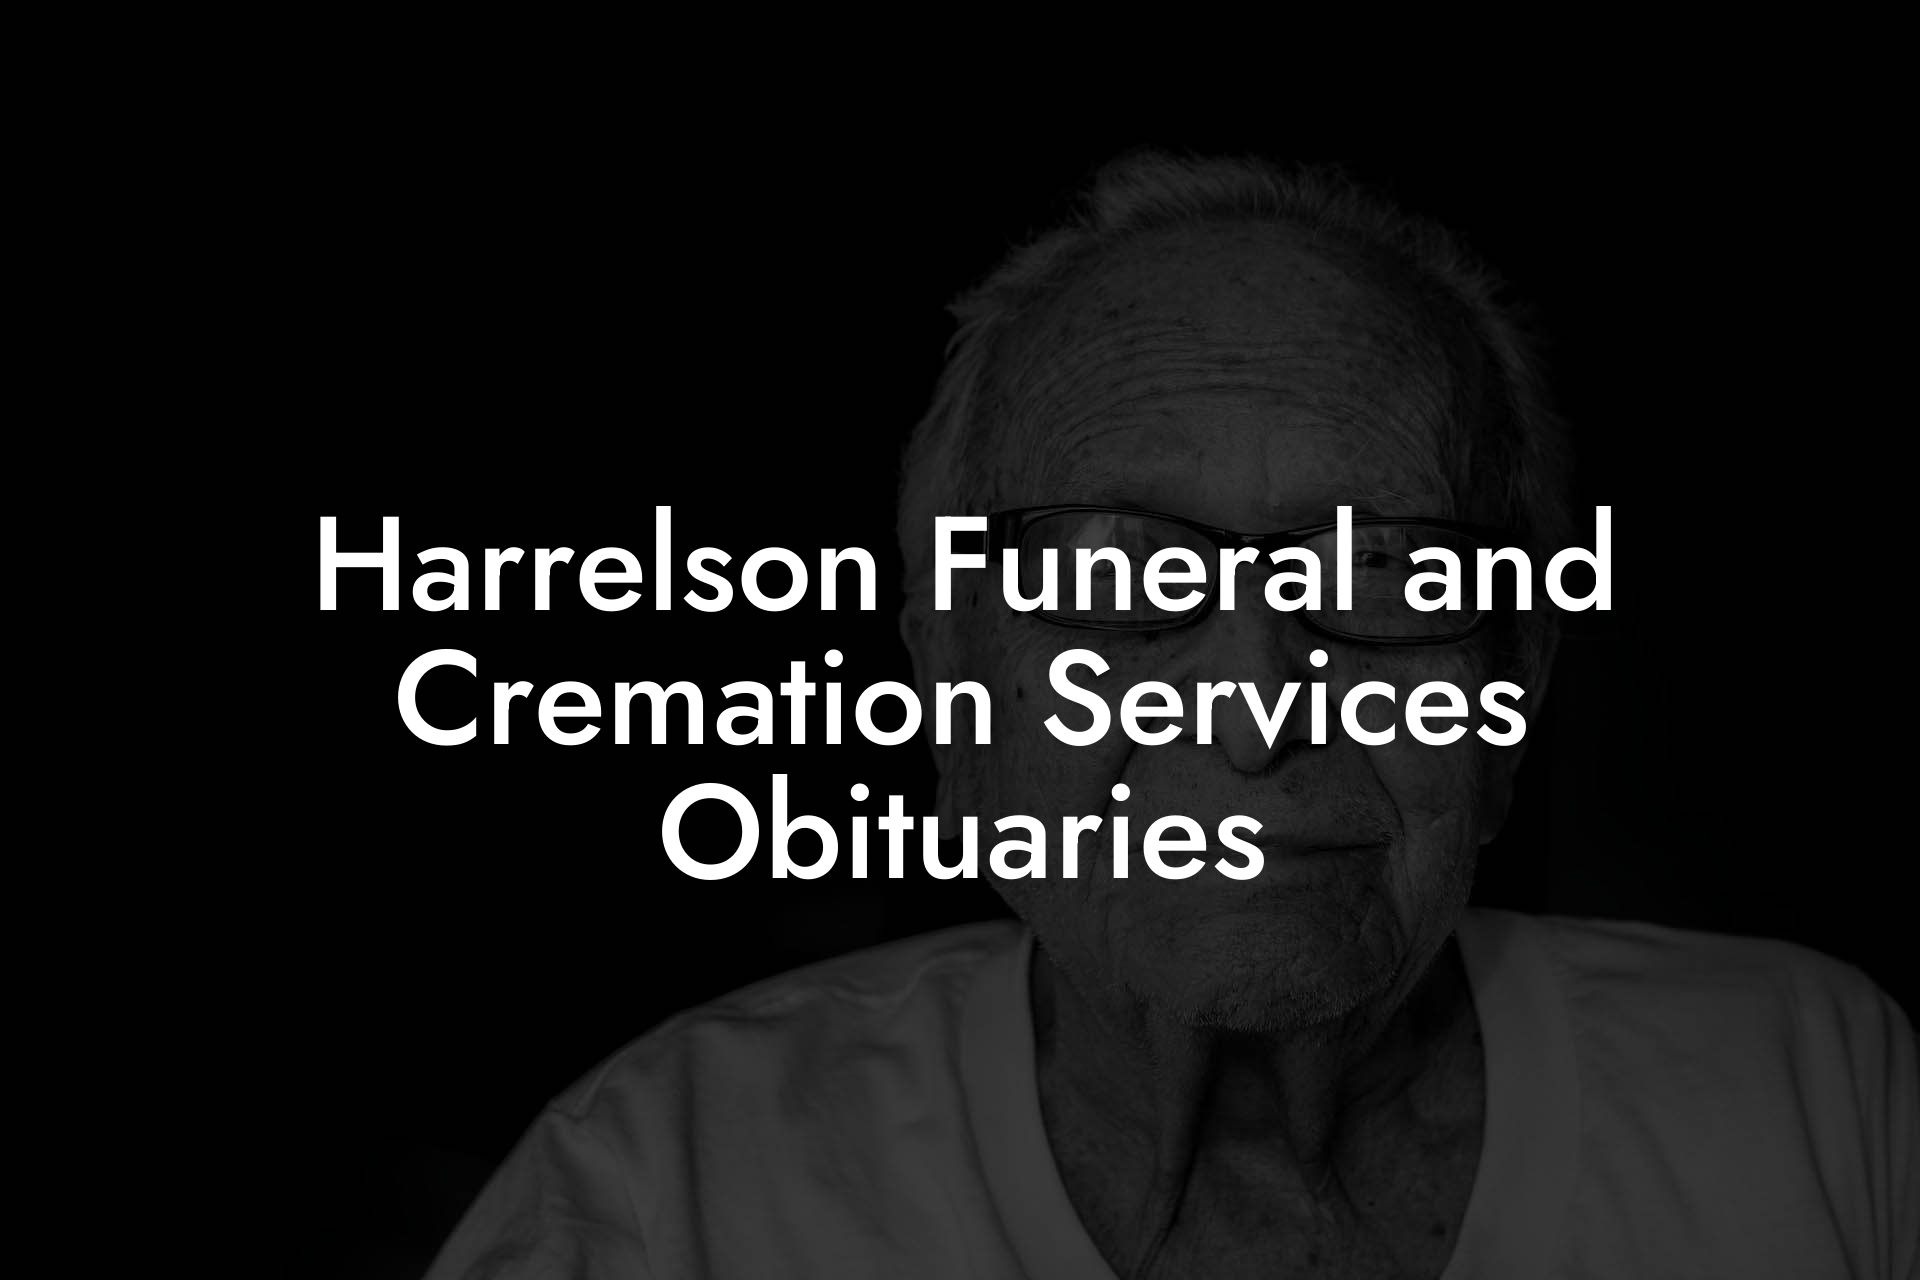 Harrelson Funeral and Cremation Services Obituaries